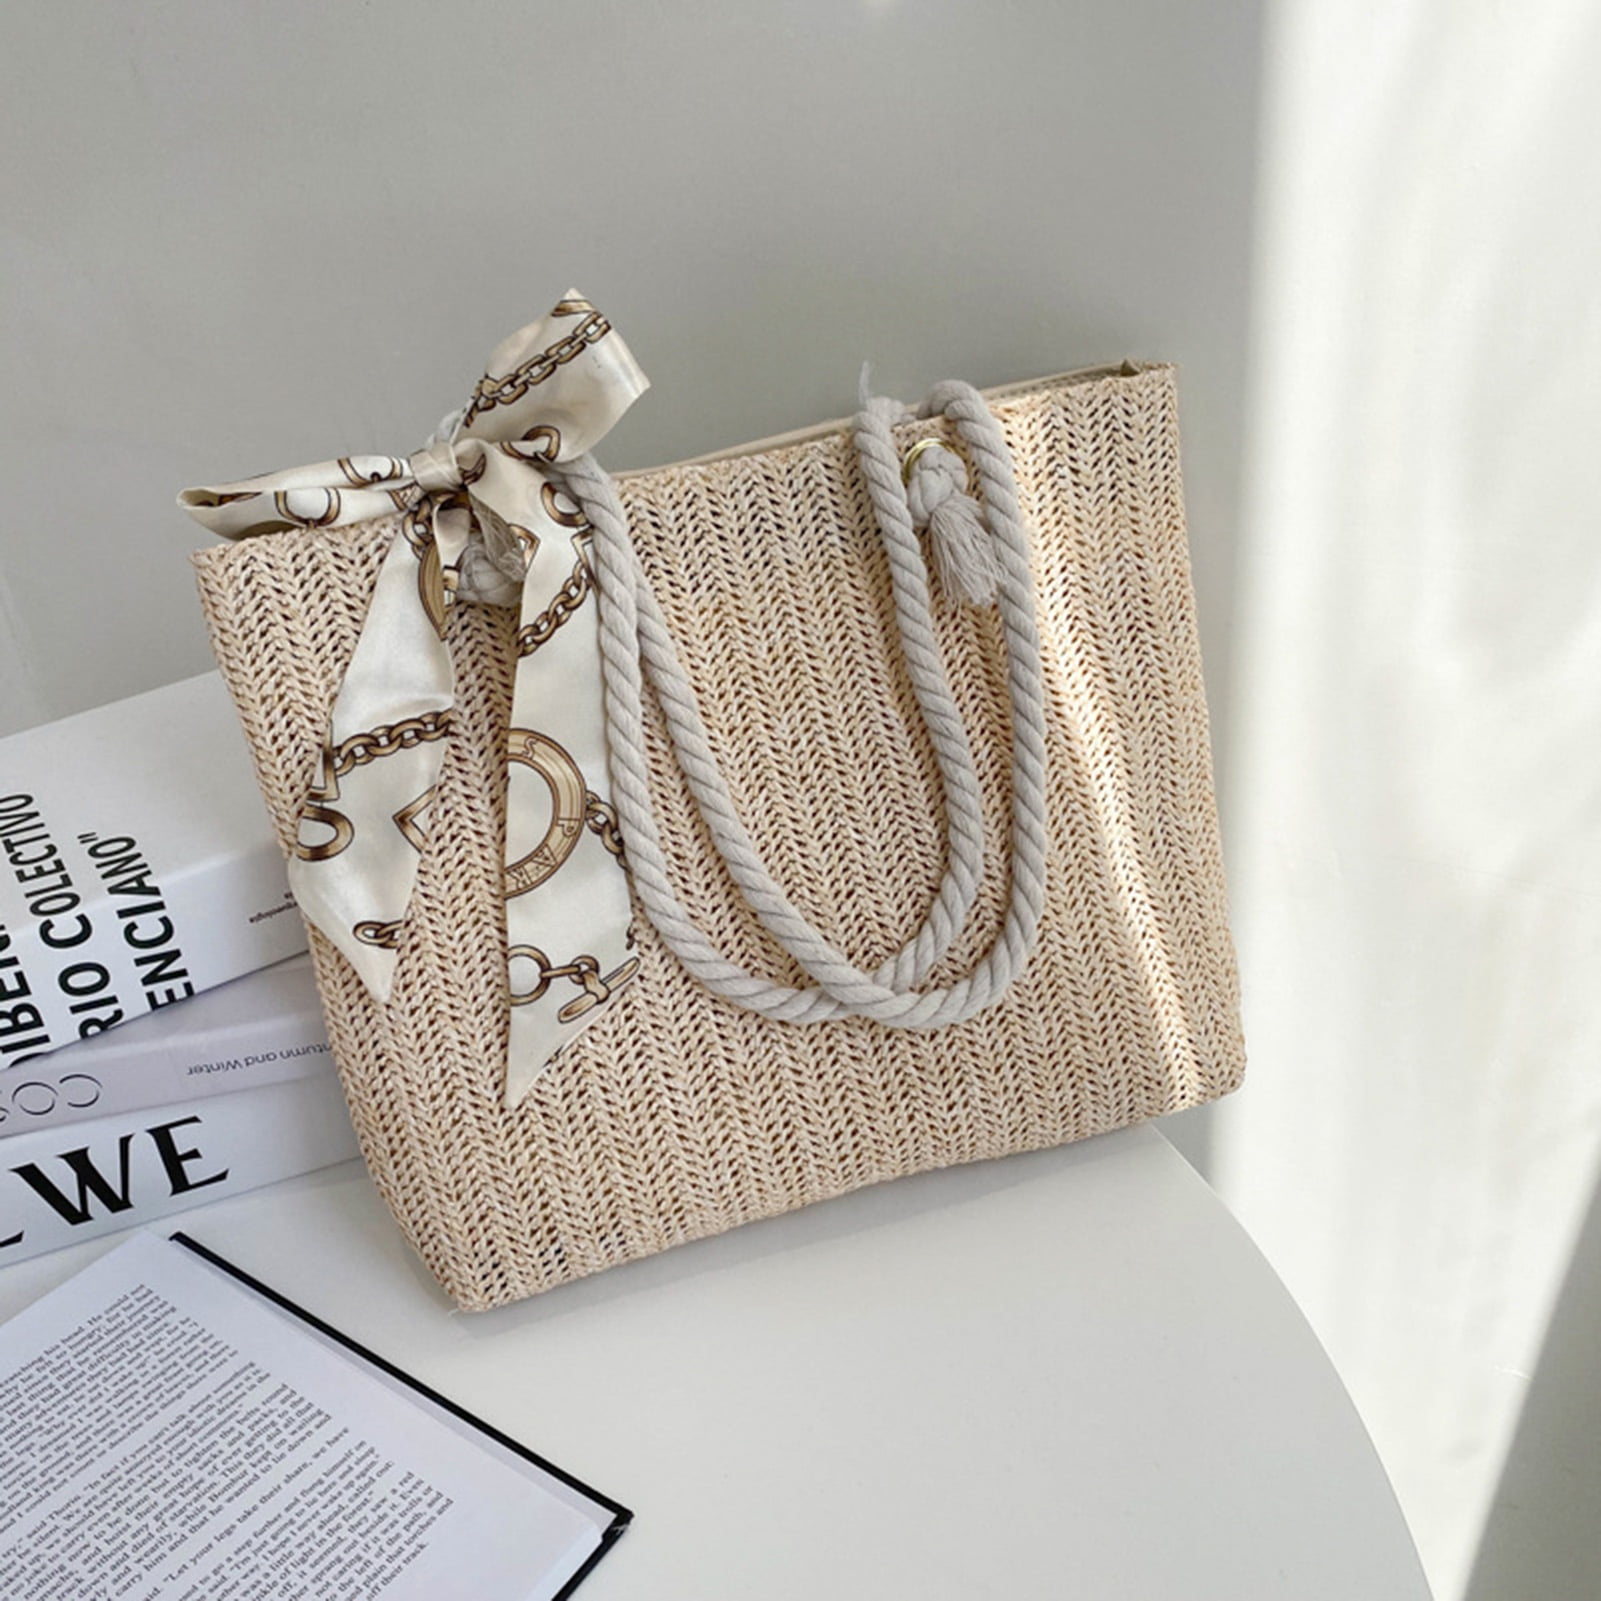 Small Straw Tote Bags: Embracing the Trend of Compact and Chic